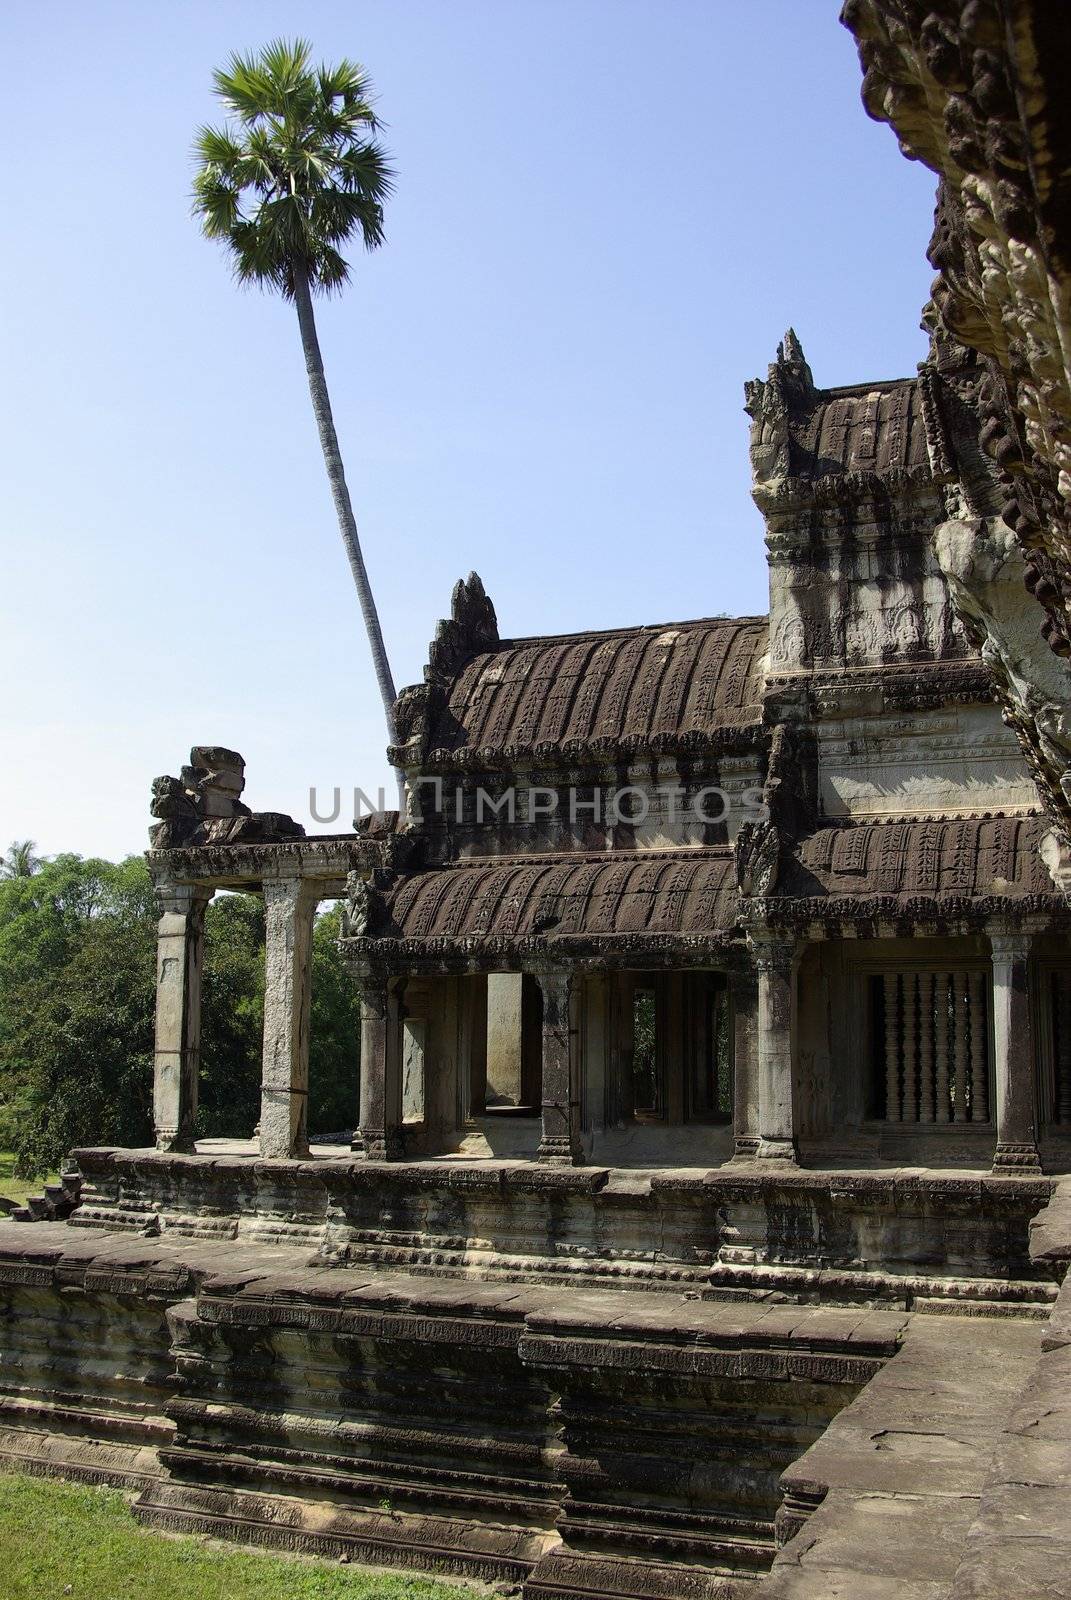 It's an unusual part of Angkor Wat temple with a high palm